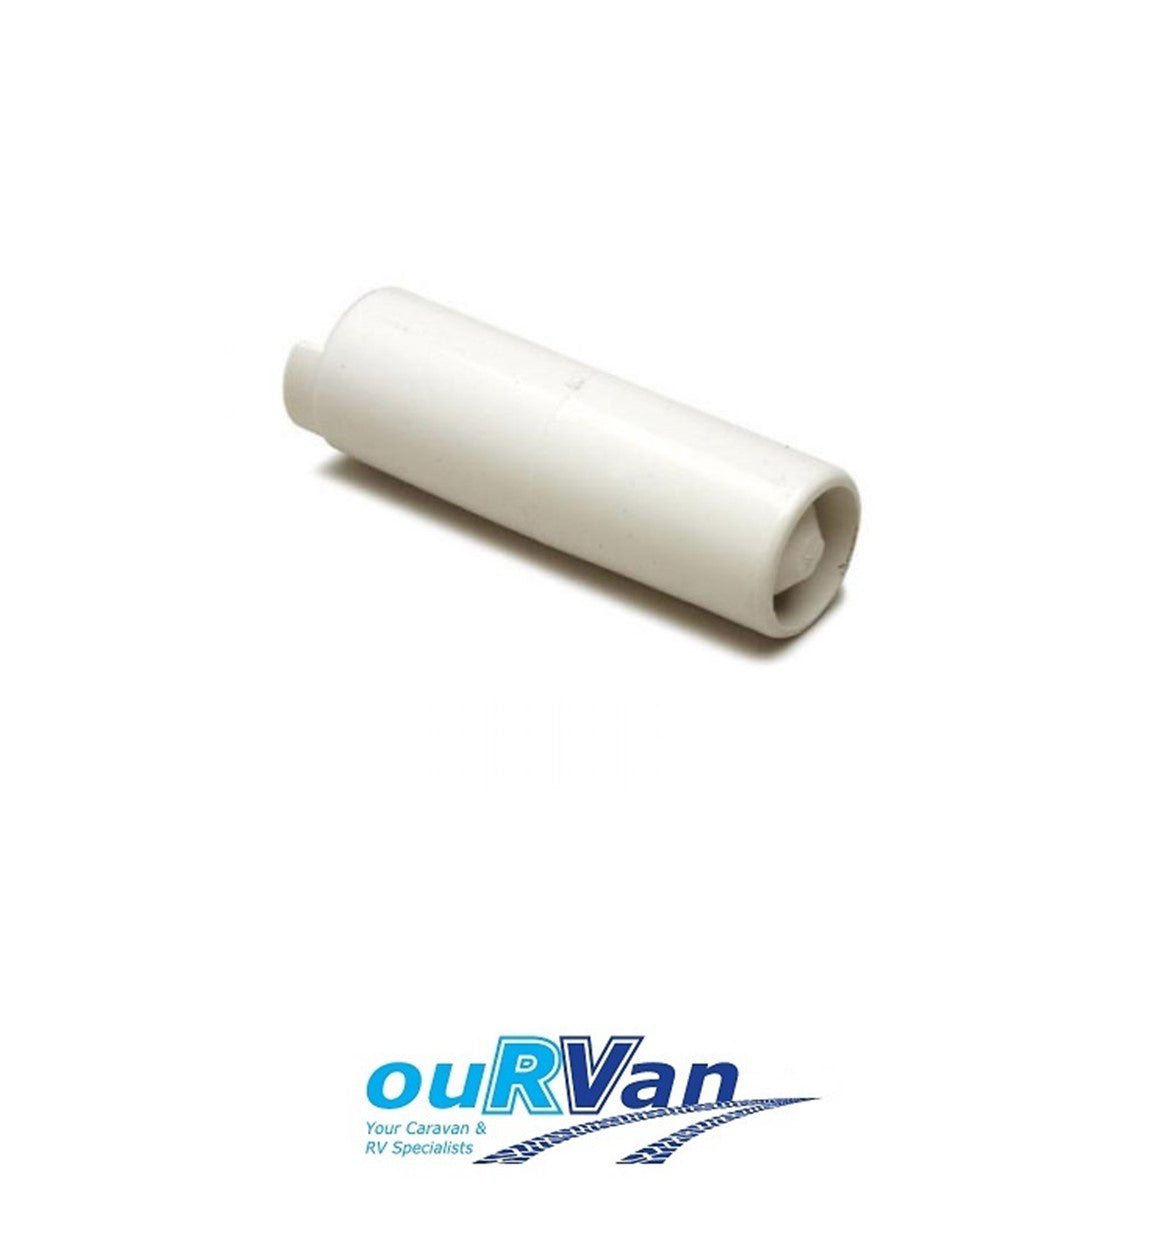 Camec Whale One-way In-line Valve 1/2" Non-return Fv1227